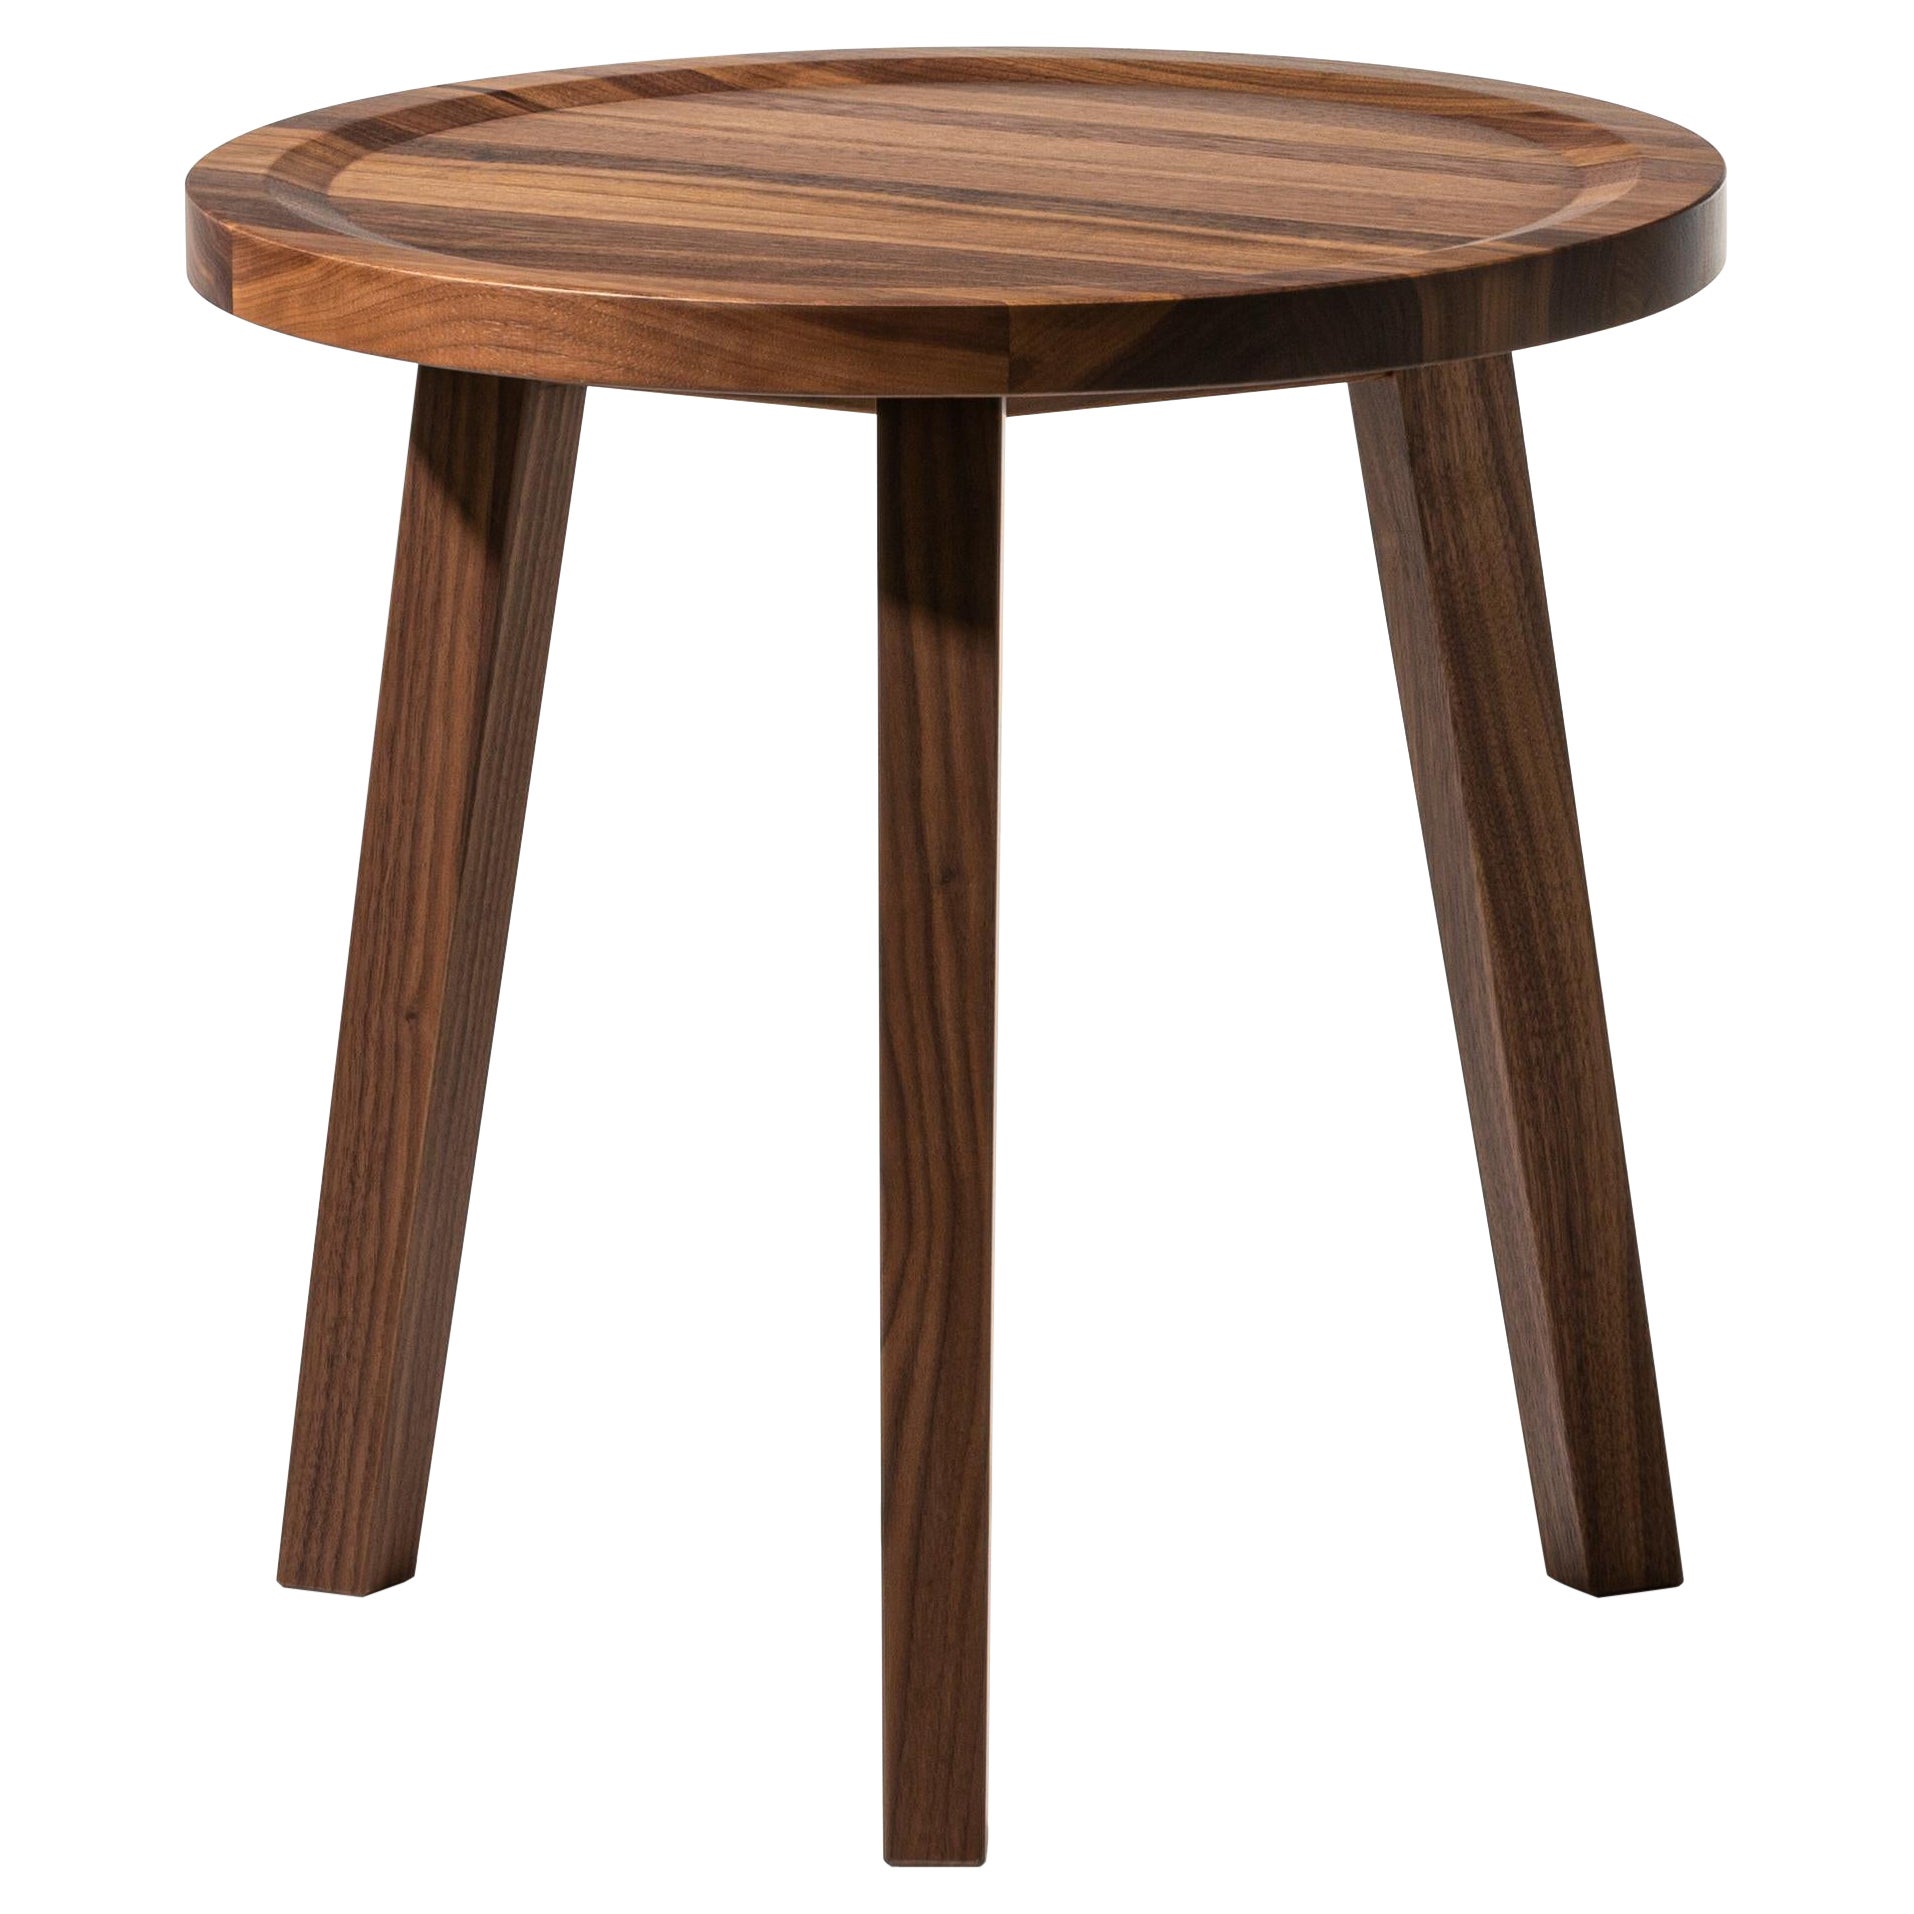 Gervasoni Gray 42 Natural Lacquered American Walnut Side Table by Paola Navone